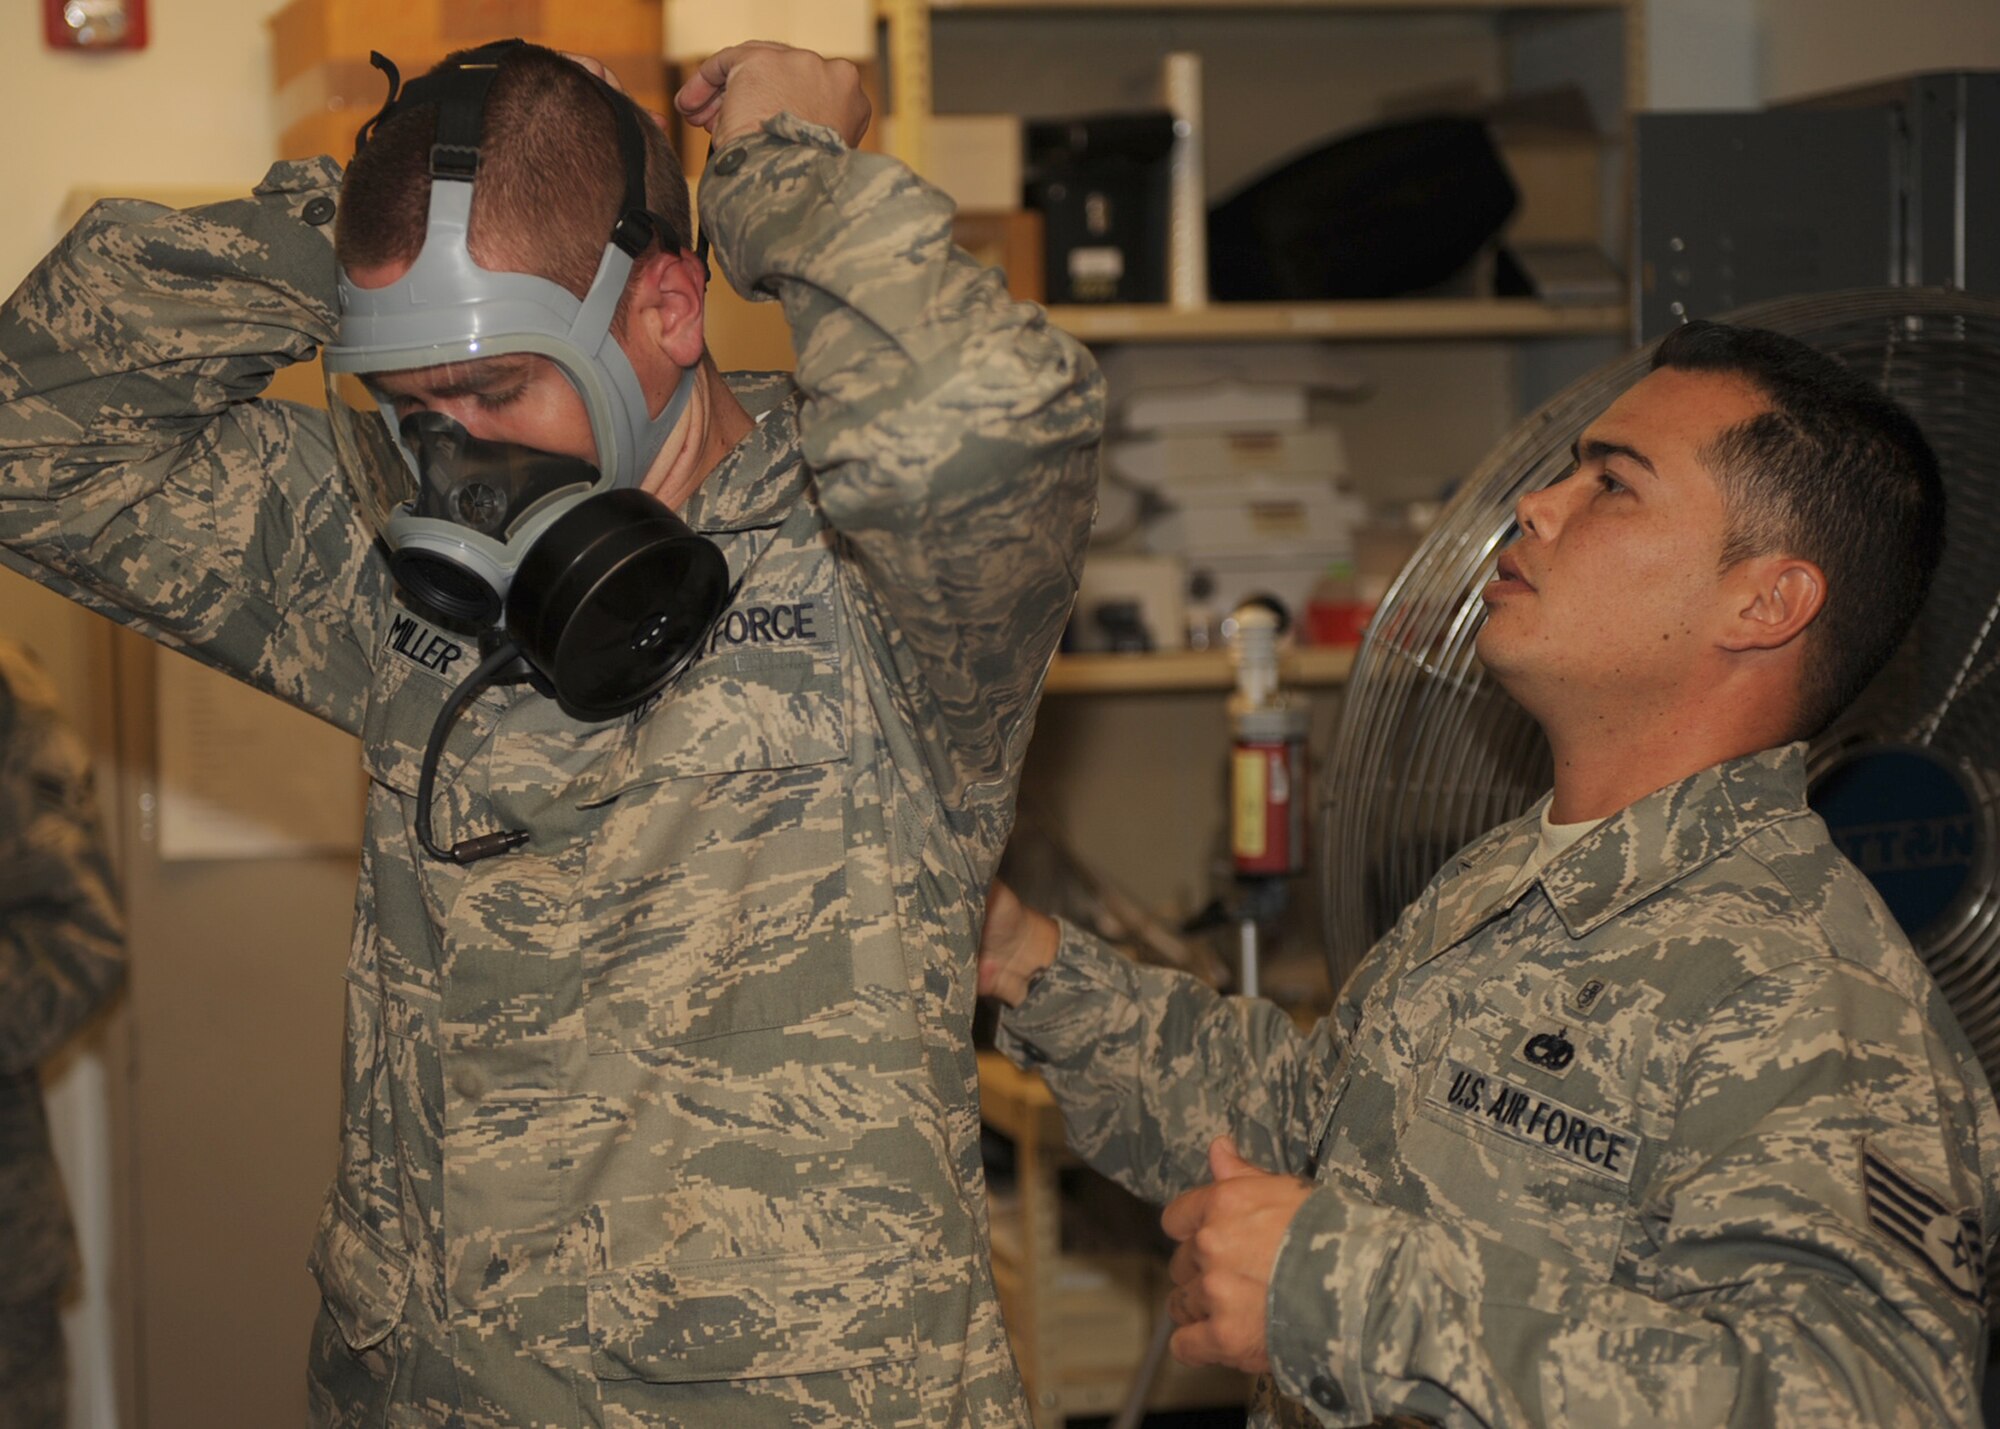 Staff Sgt. Brian Moses, 4th Aeromedical Dental Squadron bioenvironmental technician, performs a gas mask fit test on Airman 1st Class Christopher Miller, 4th Logistics Readiness Squadron vehicle operator, at Seymour Johnson Air Force Base, N.C., Sept. 24, 2009. The test ensures proper mask fitting so no harmful agents can enter the mask and harm personnel. (U.S. Air Force photo/Senior Airman Ciara Wymbs) 	 